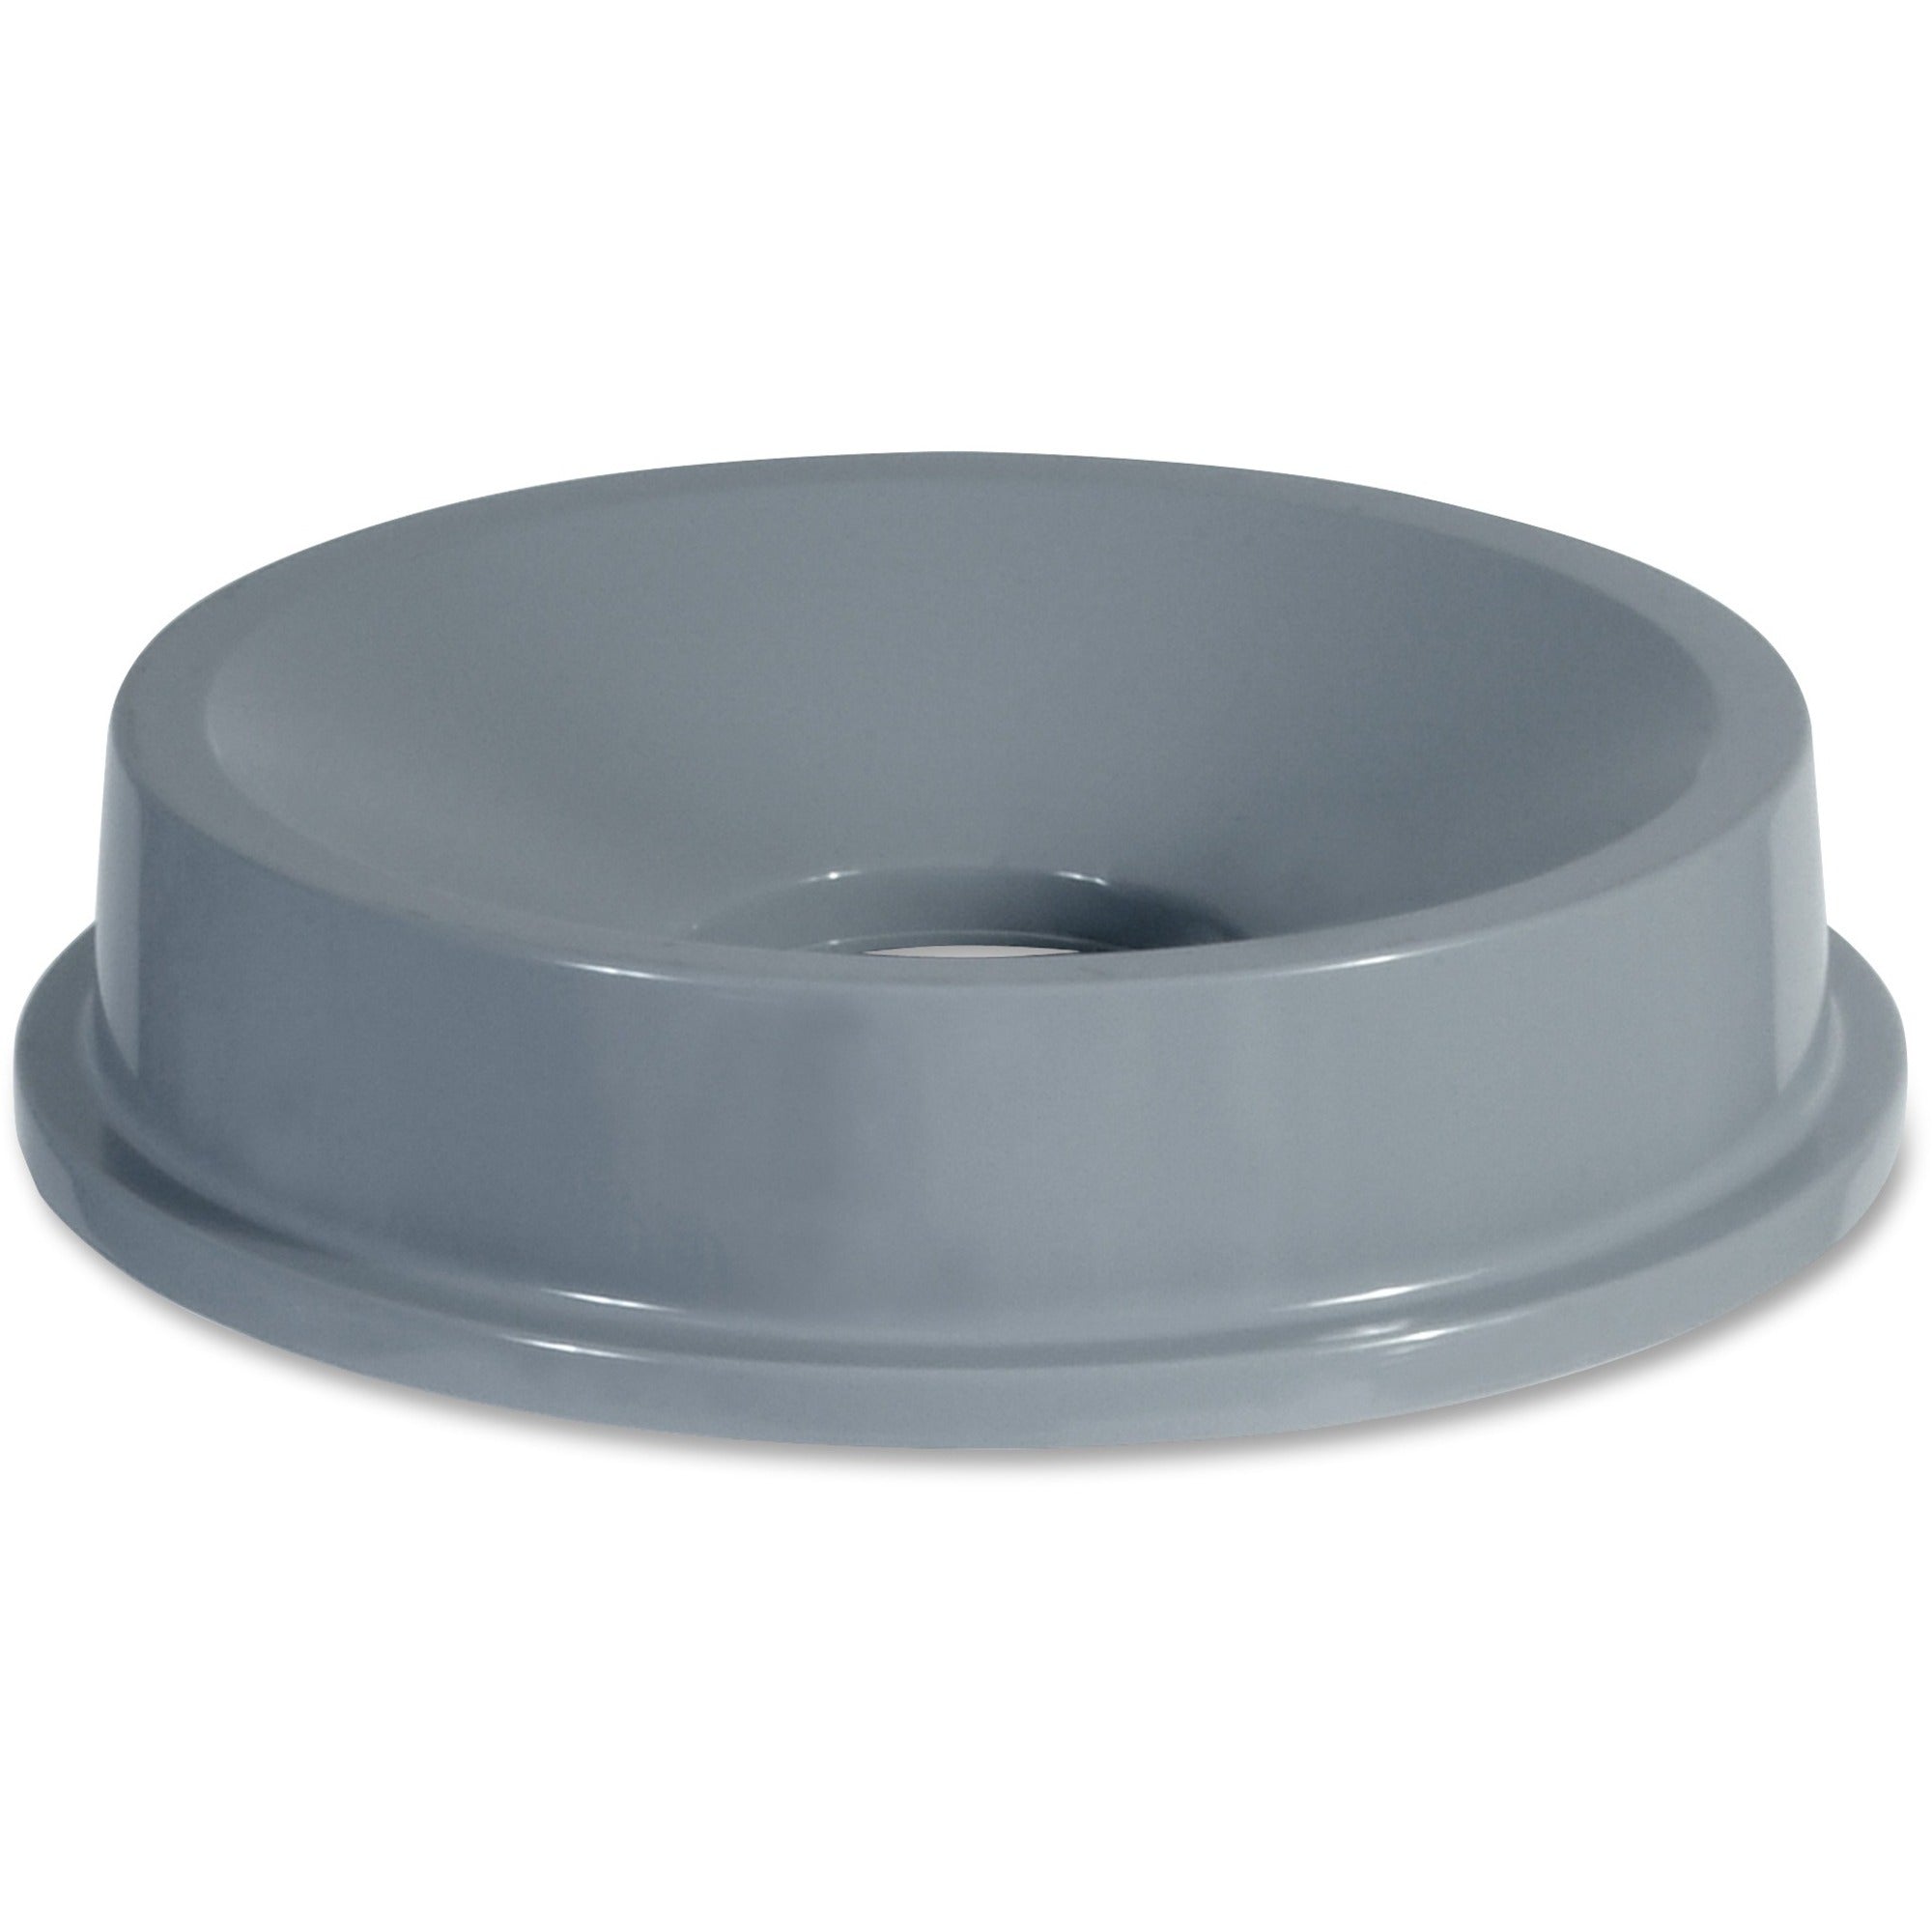 rubbermaid-commercial-brute-32-gallon-container-funnel-top-lids-round-plastic-4-carton-gray_rcp3543gract - 1